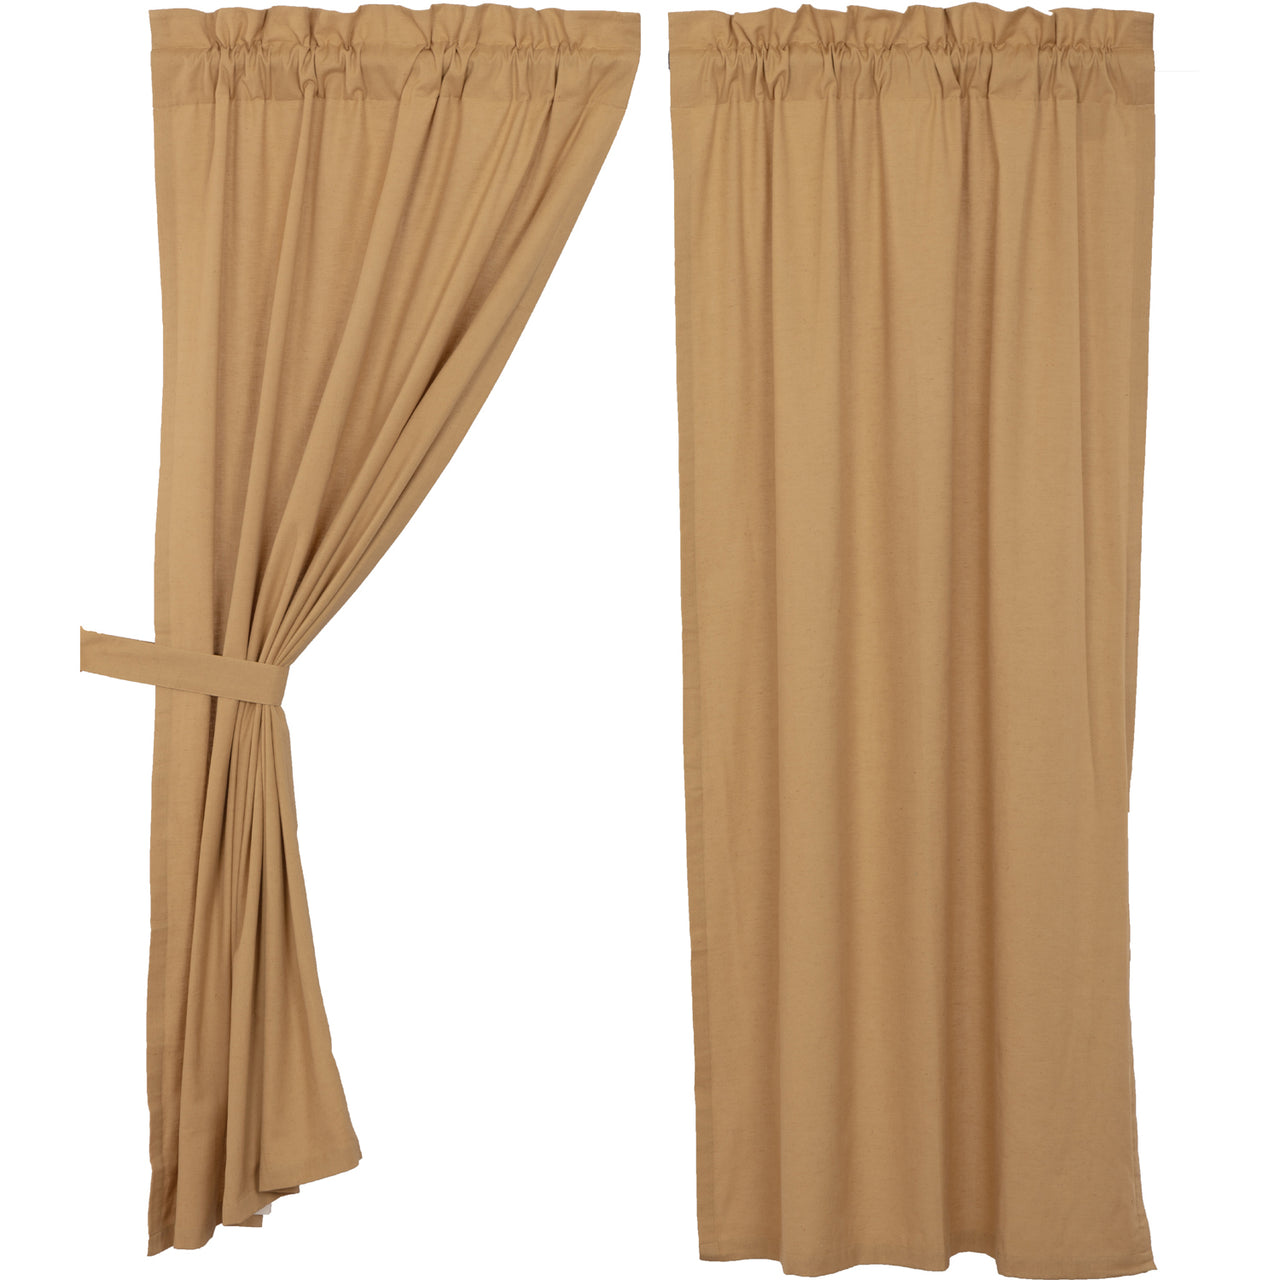 Simple Life Flax Khaki Short Panel Country Style Curtain Set of 2 63"x36"